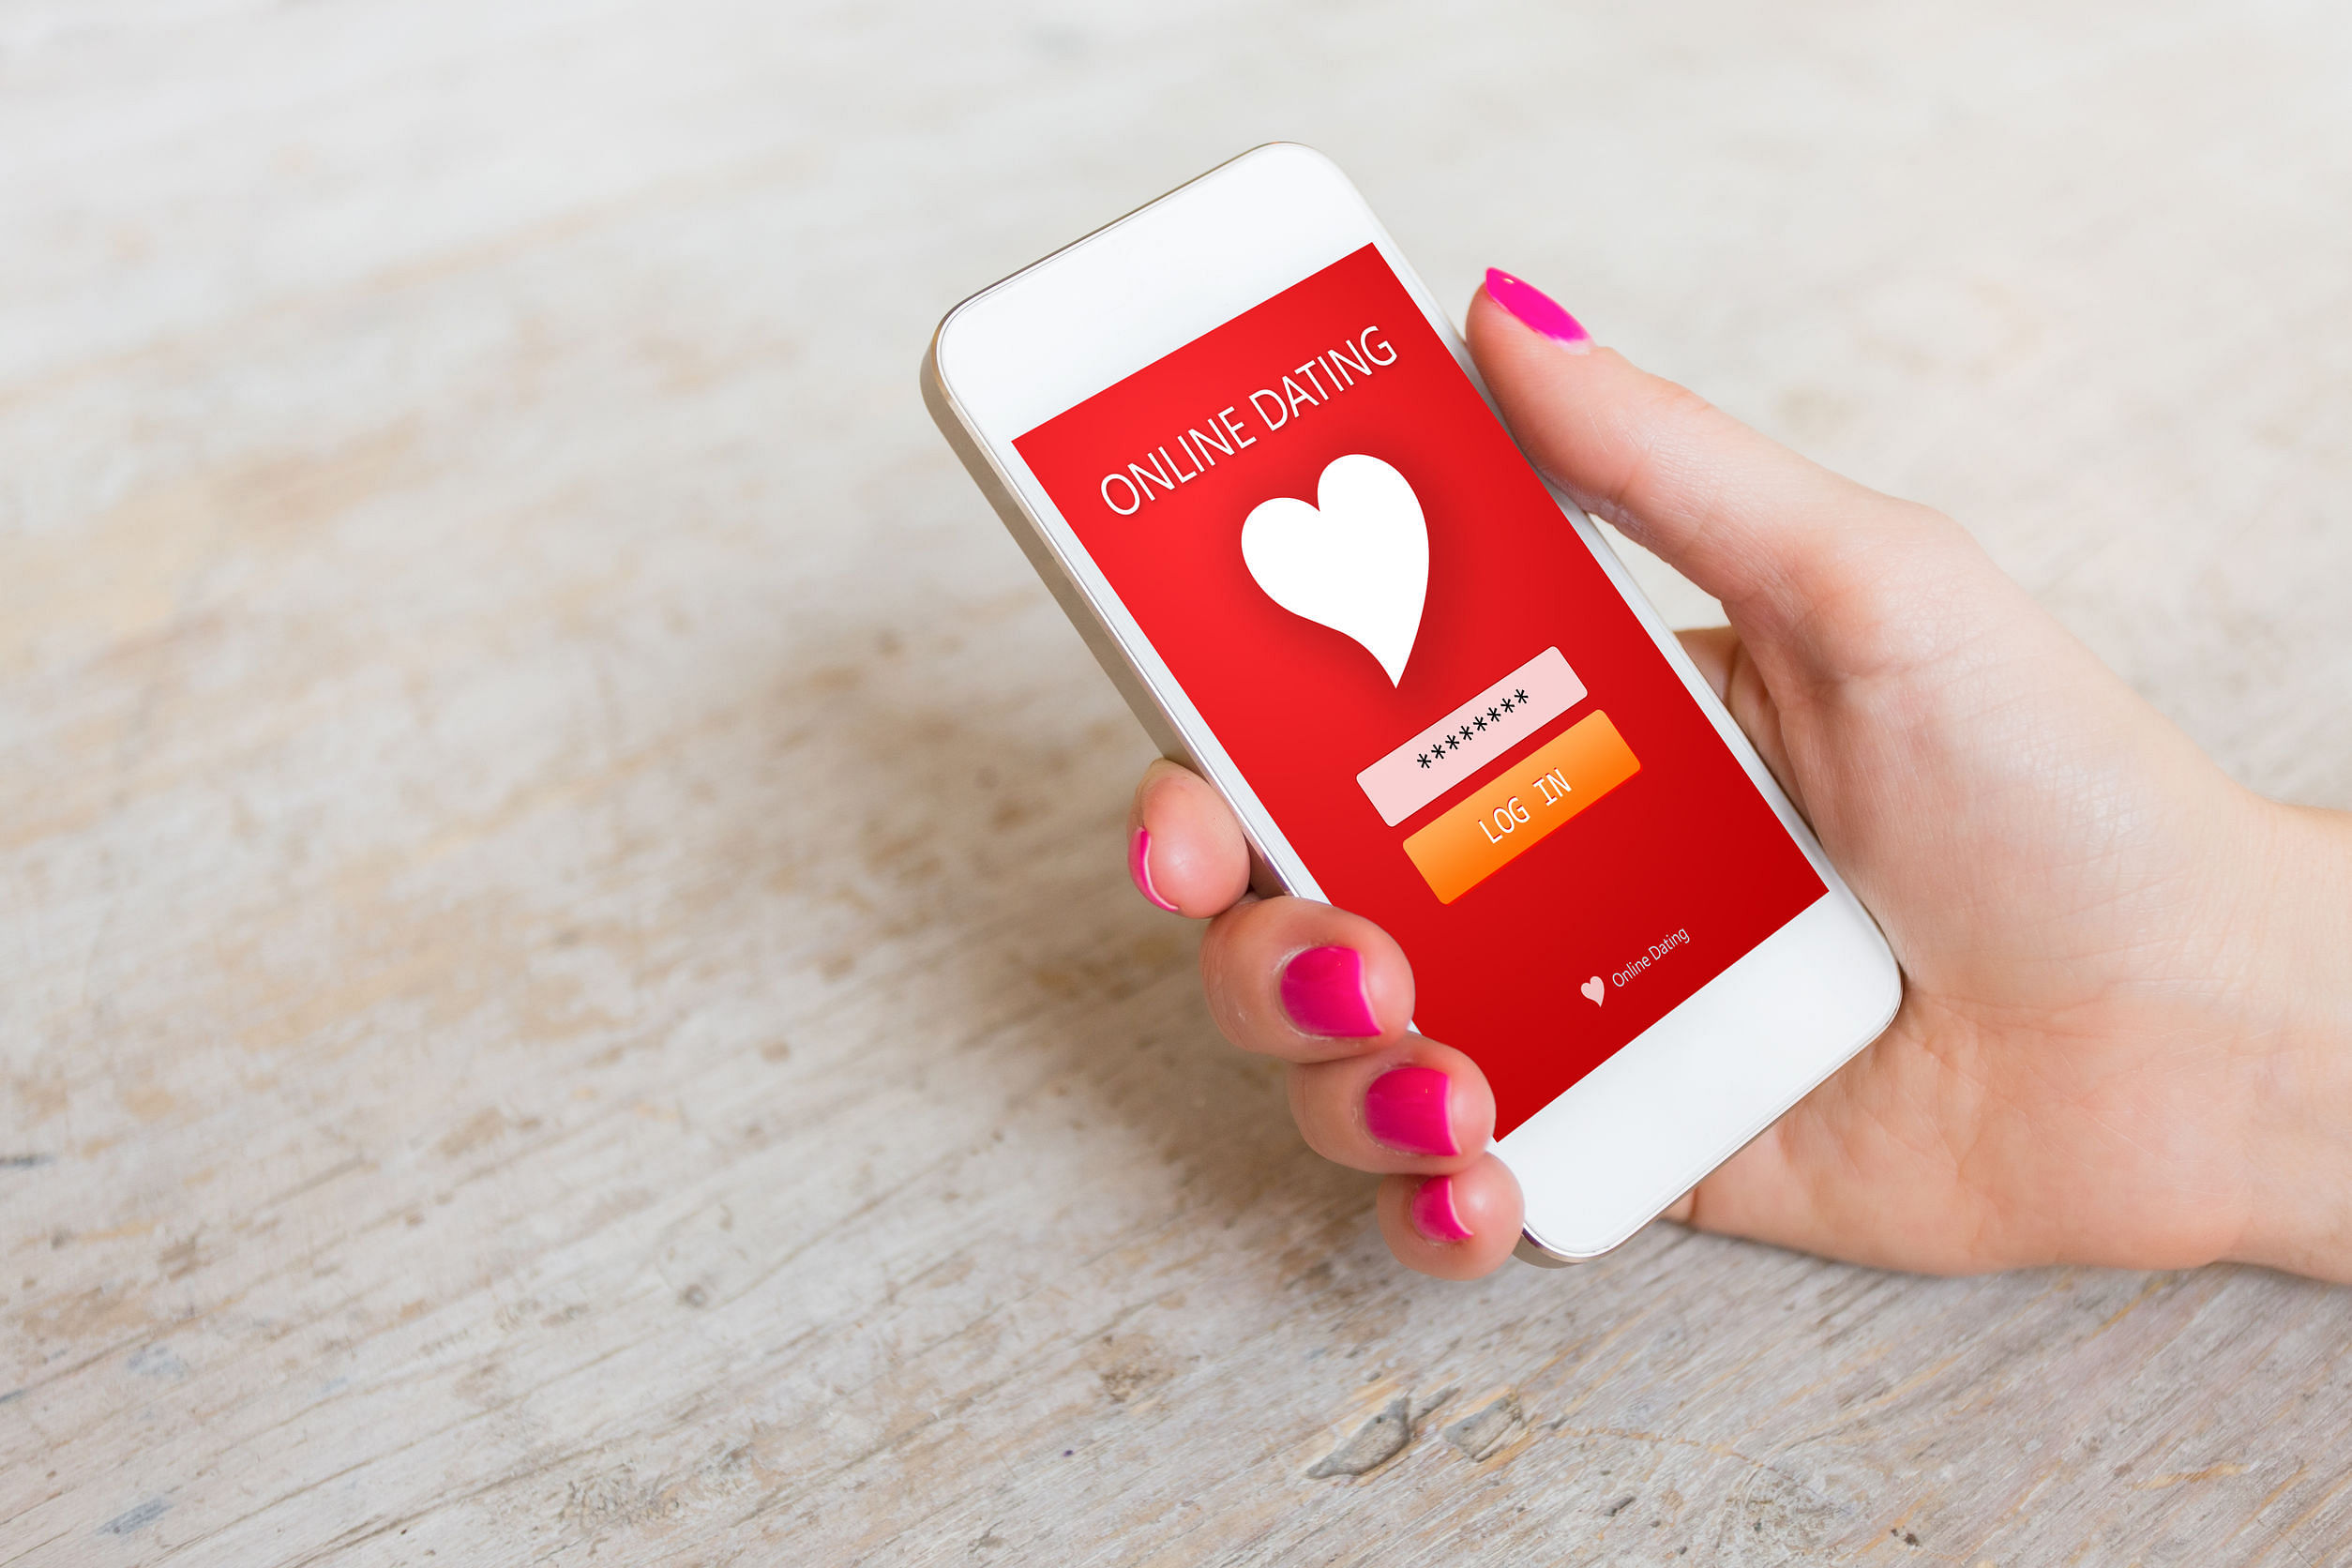 5 dating apps on iOS to find love in Singapore